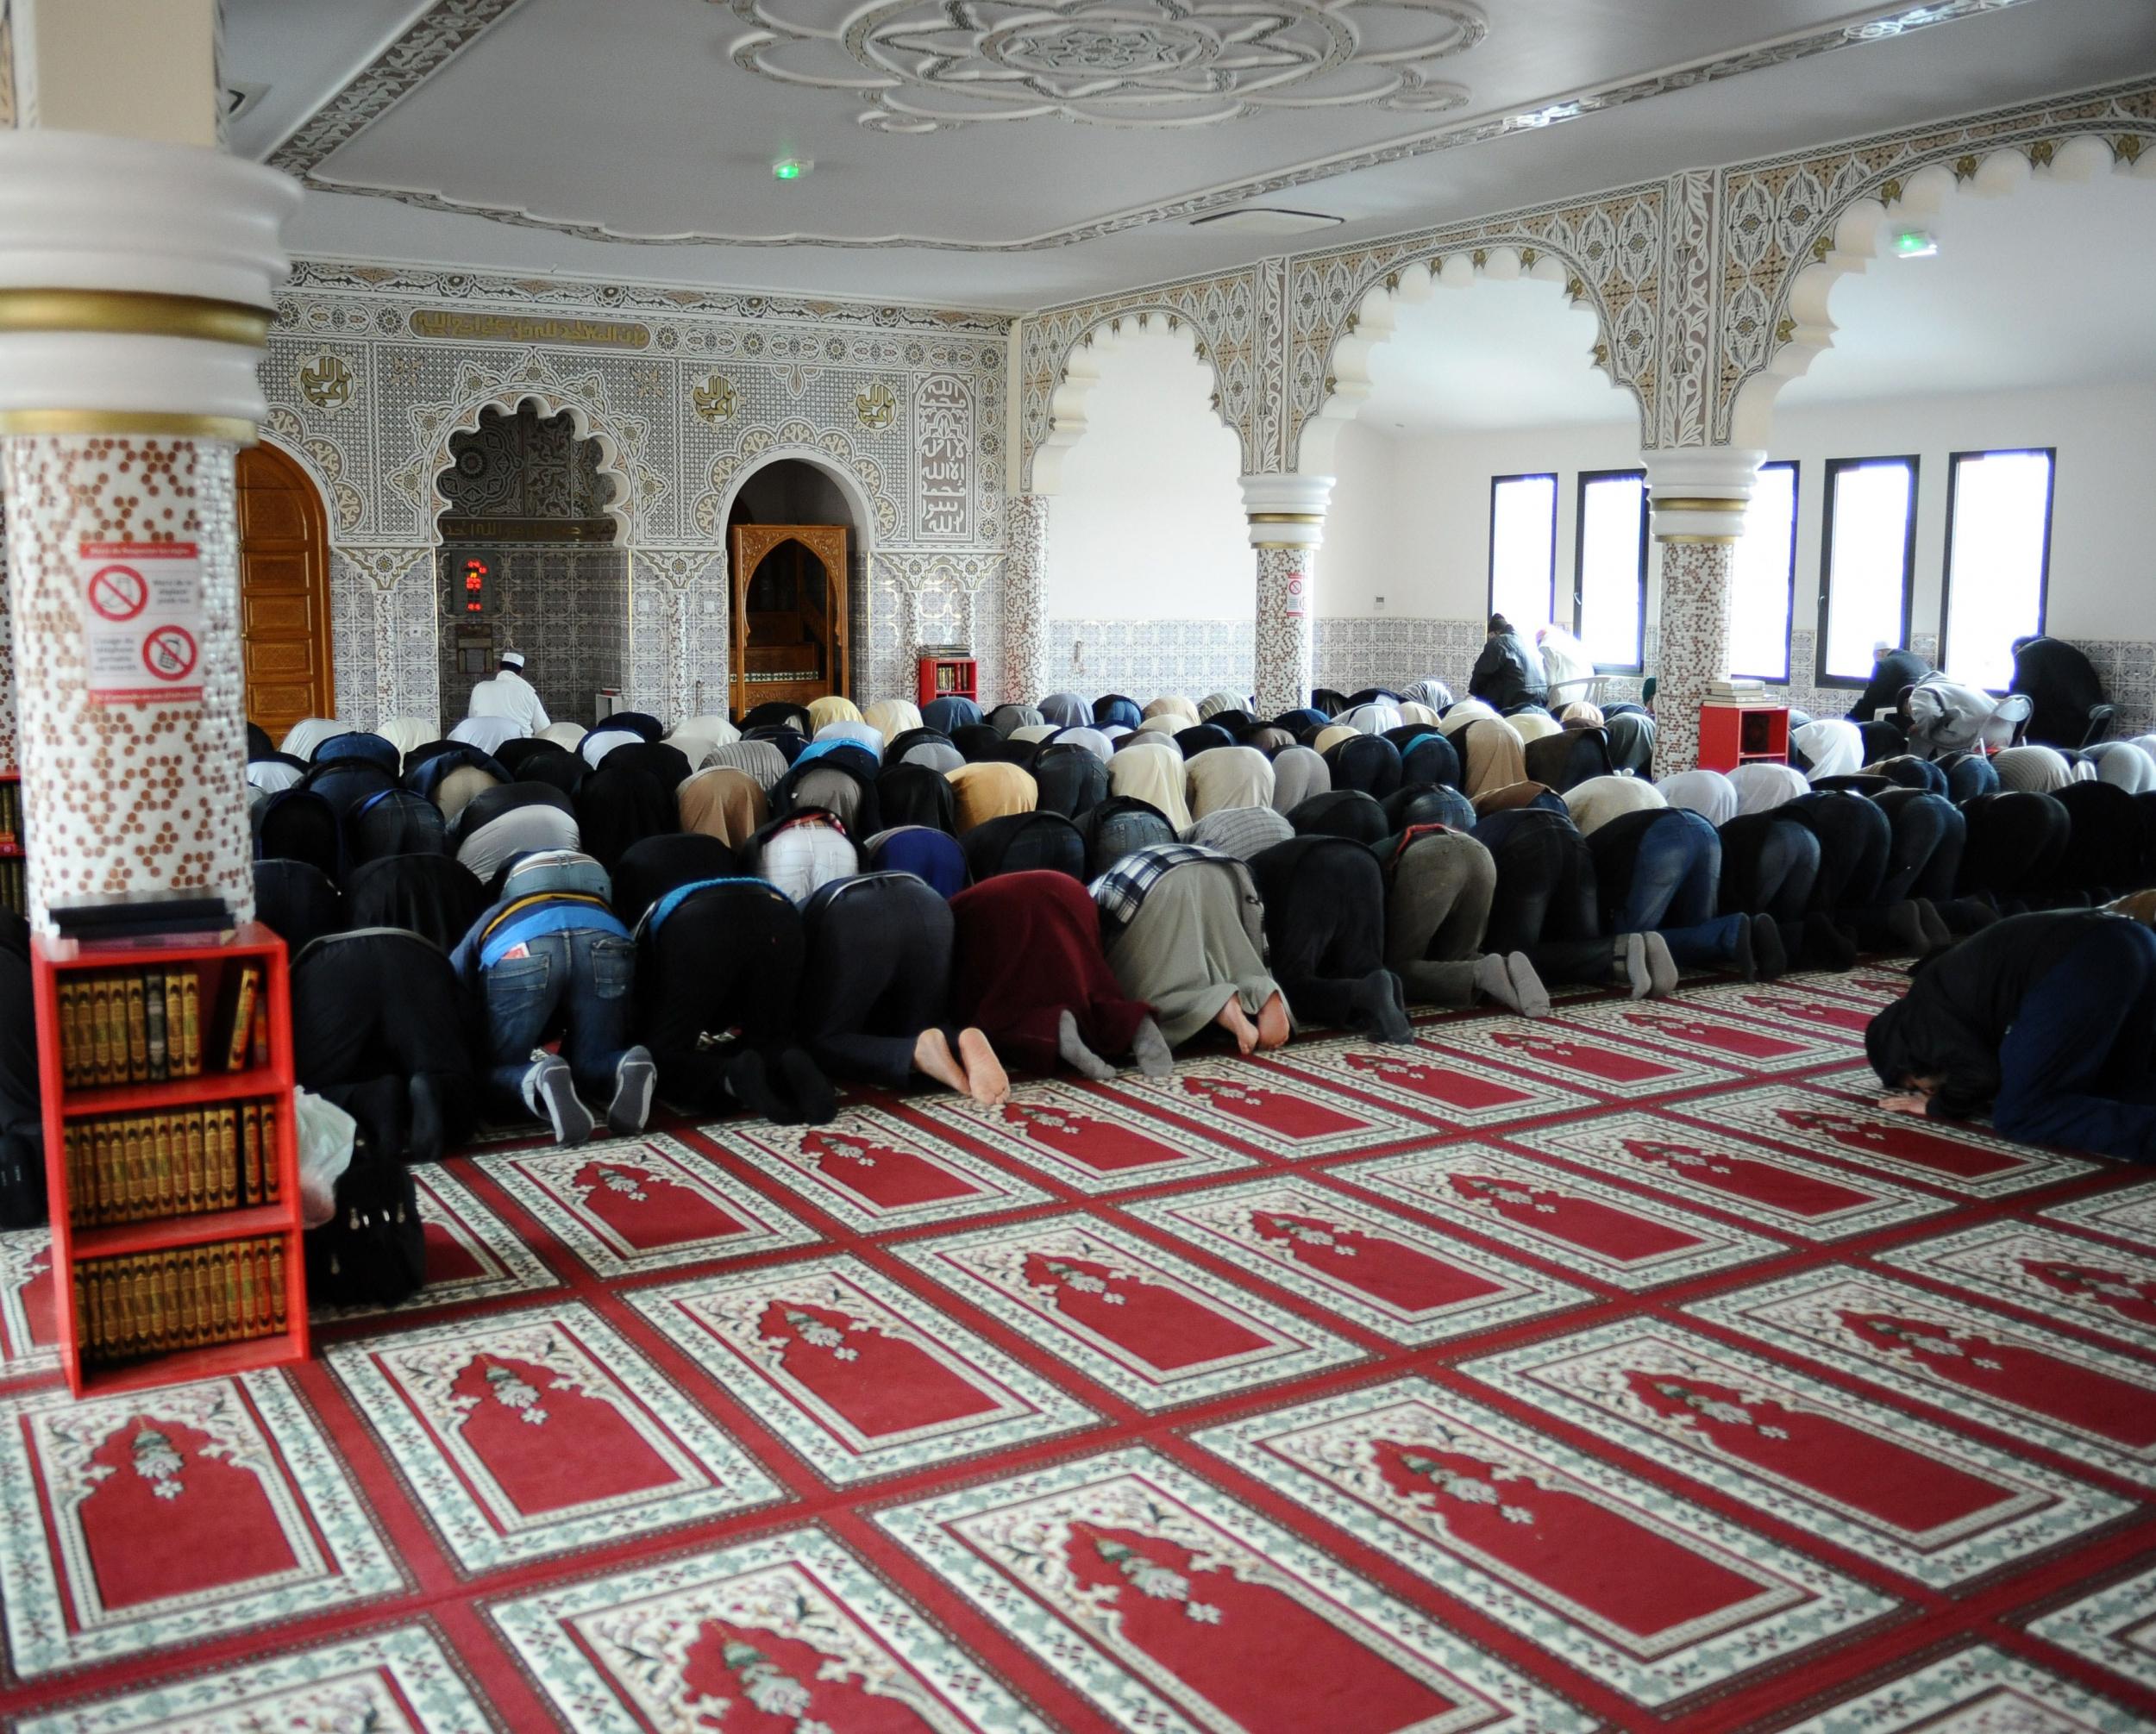 Many French mosques such as these held a minute's silence for the victims of the Paris attacks today